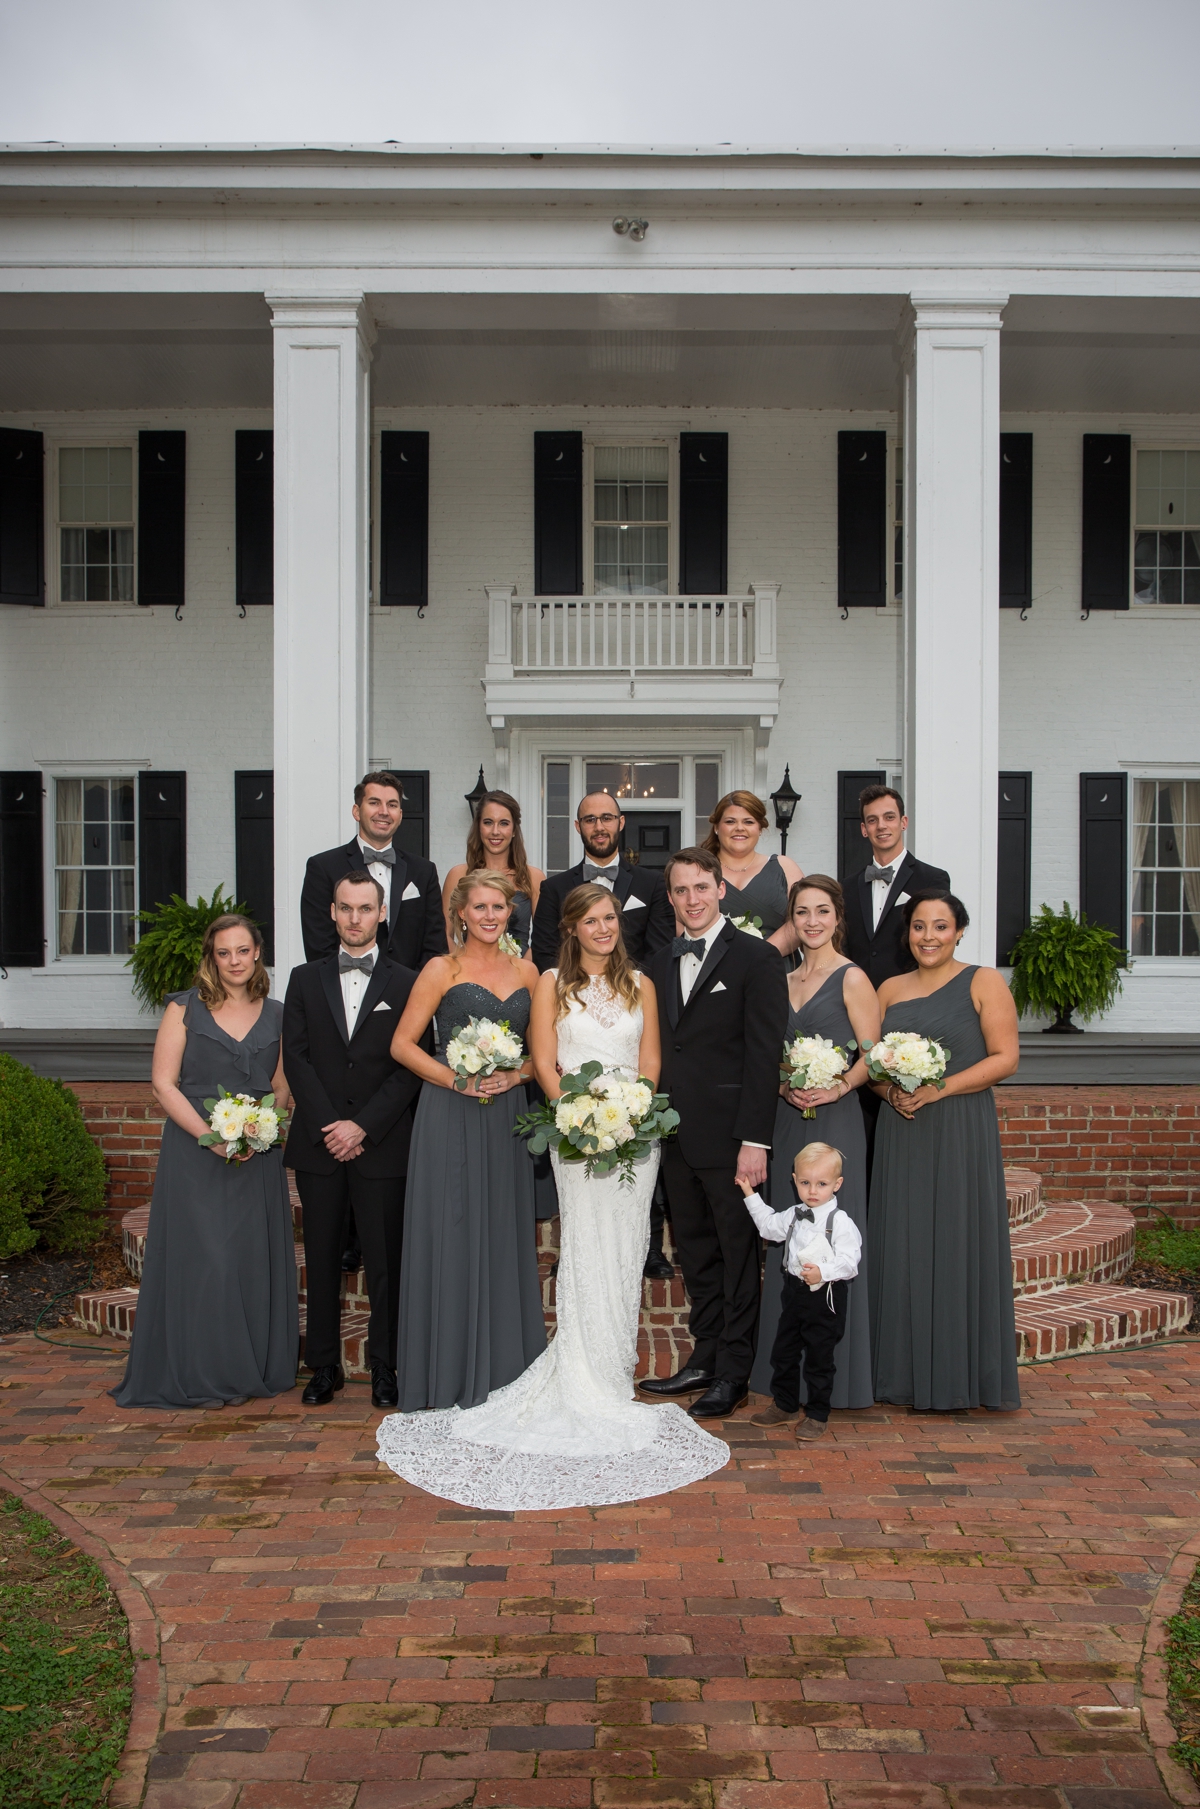 Hollyfield Manor house wedding party